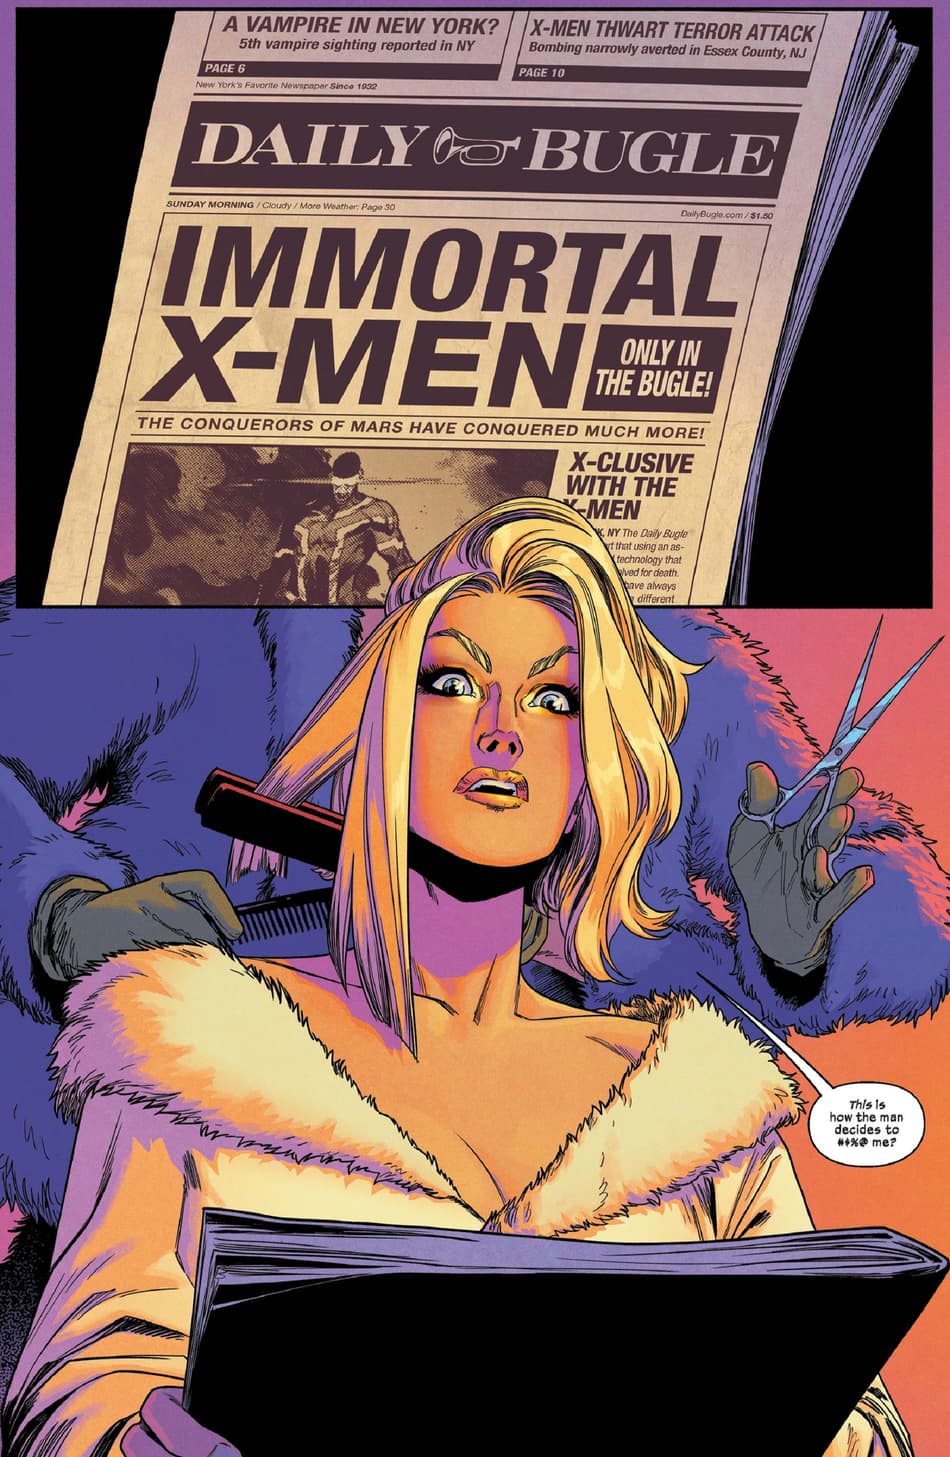 Emma Frost gets the news the hard way.